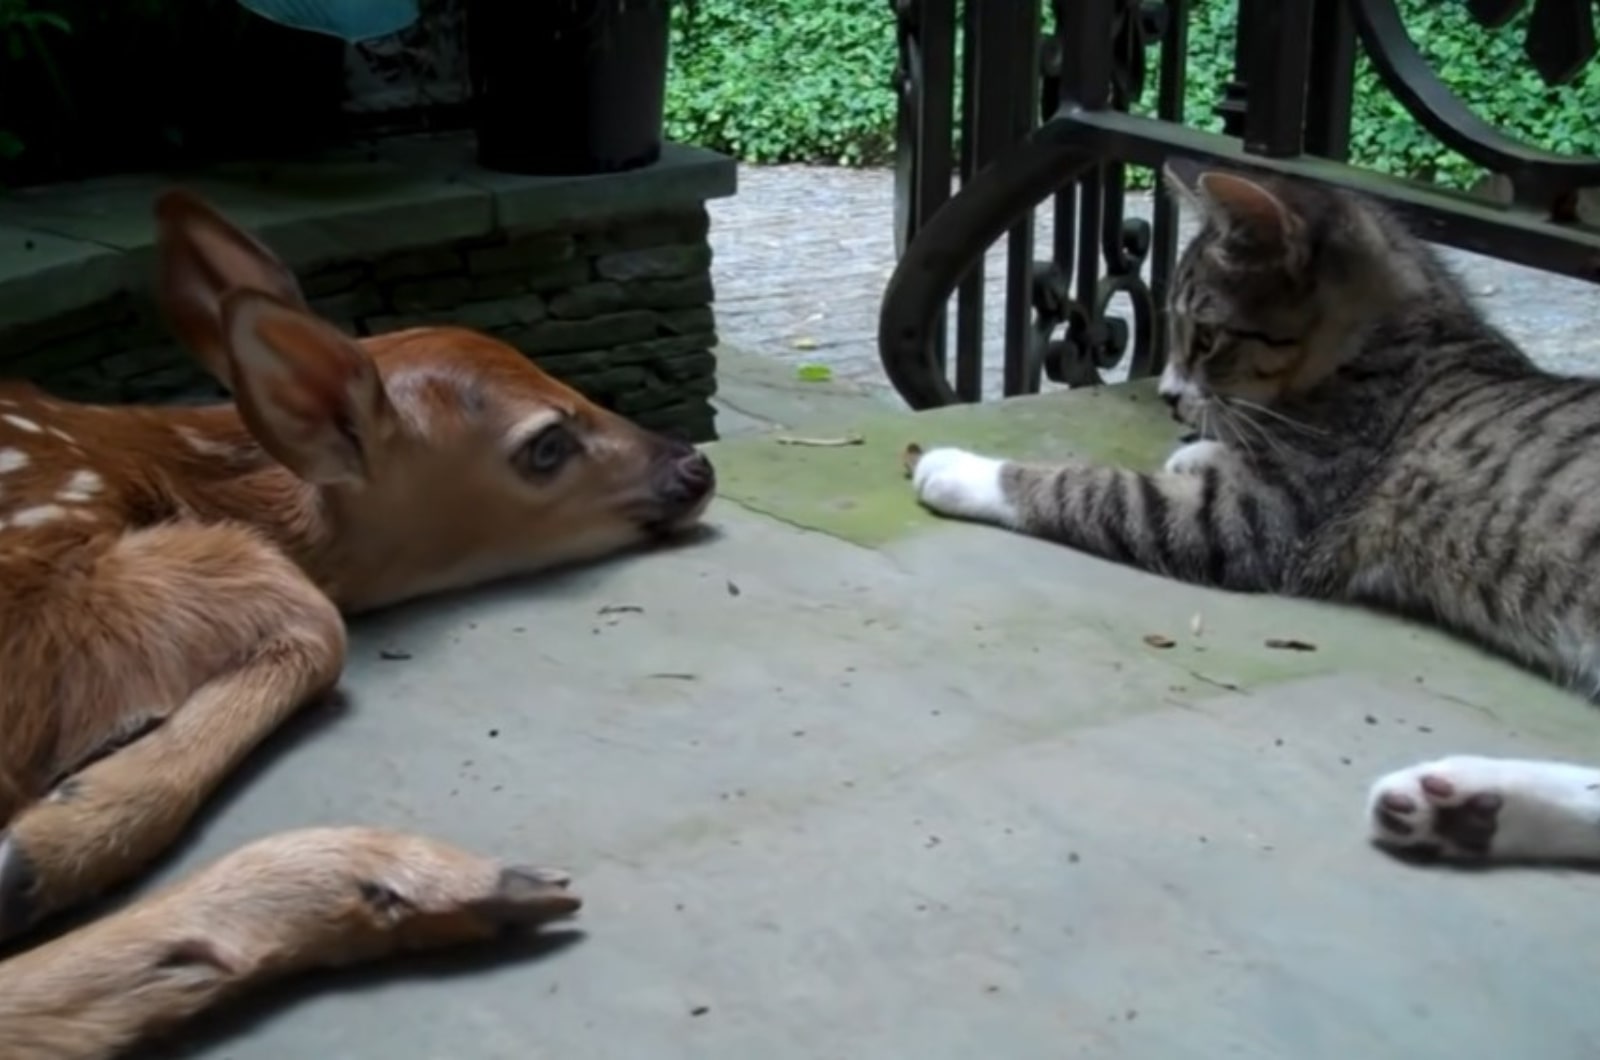 baby deer and cat lying on concrete